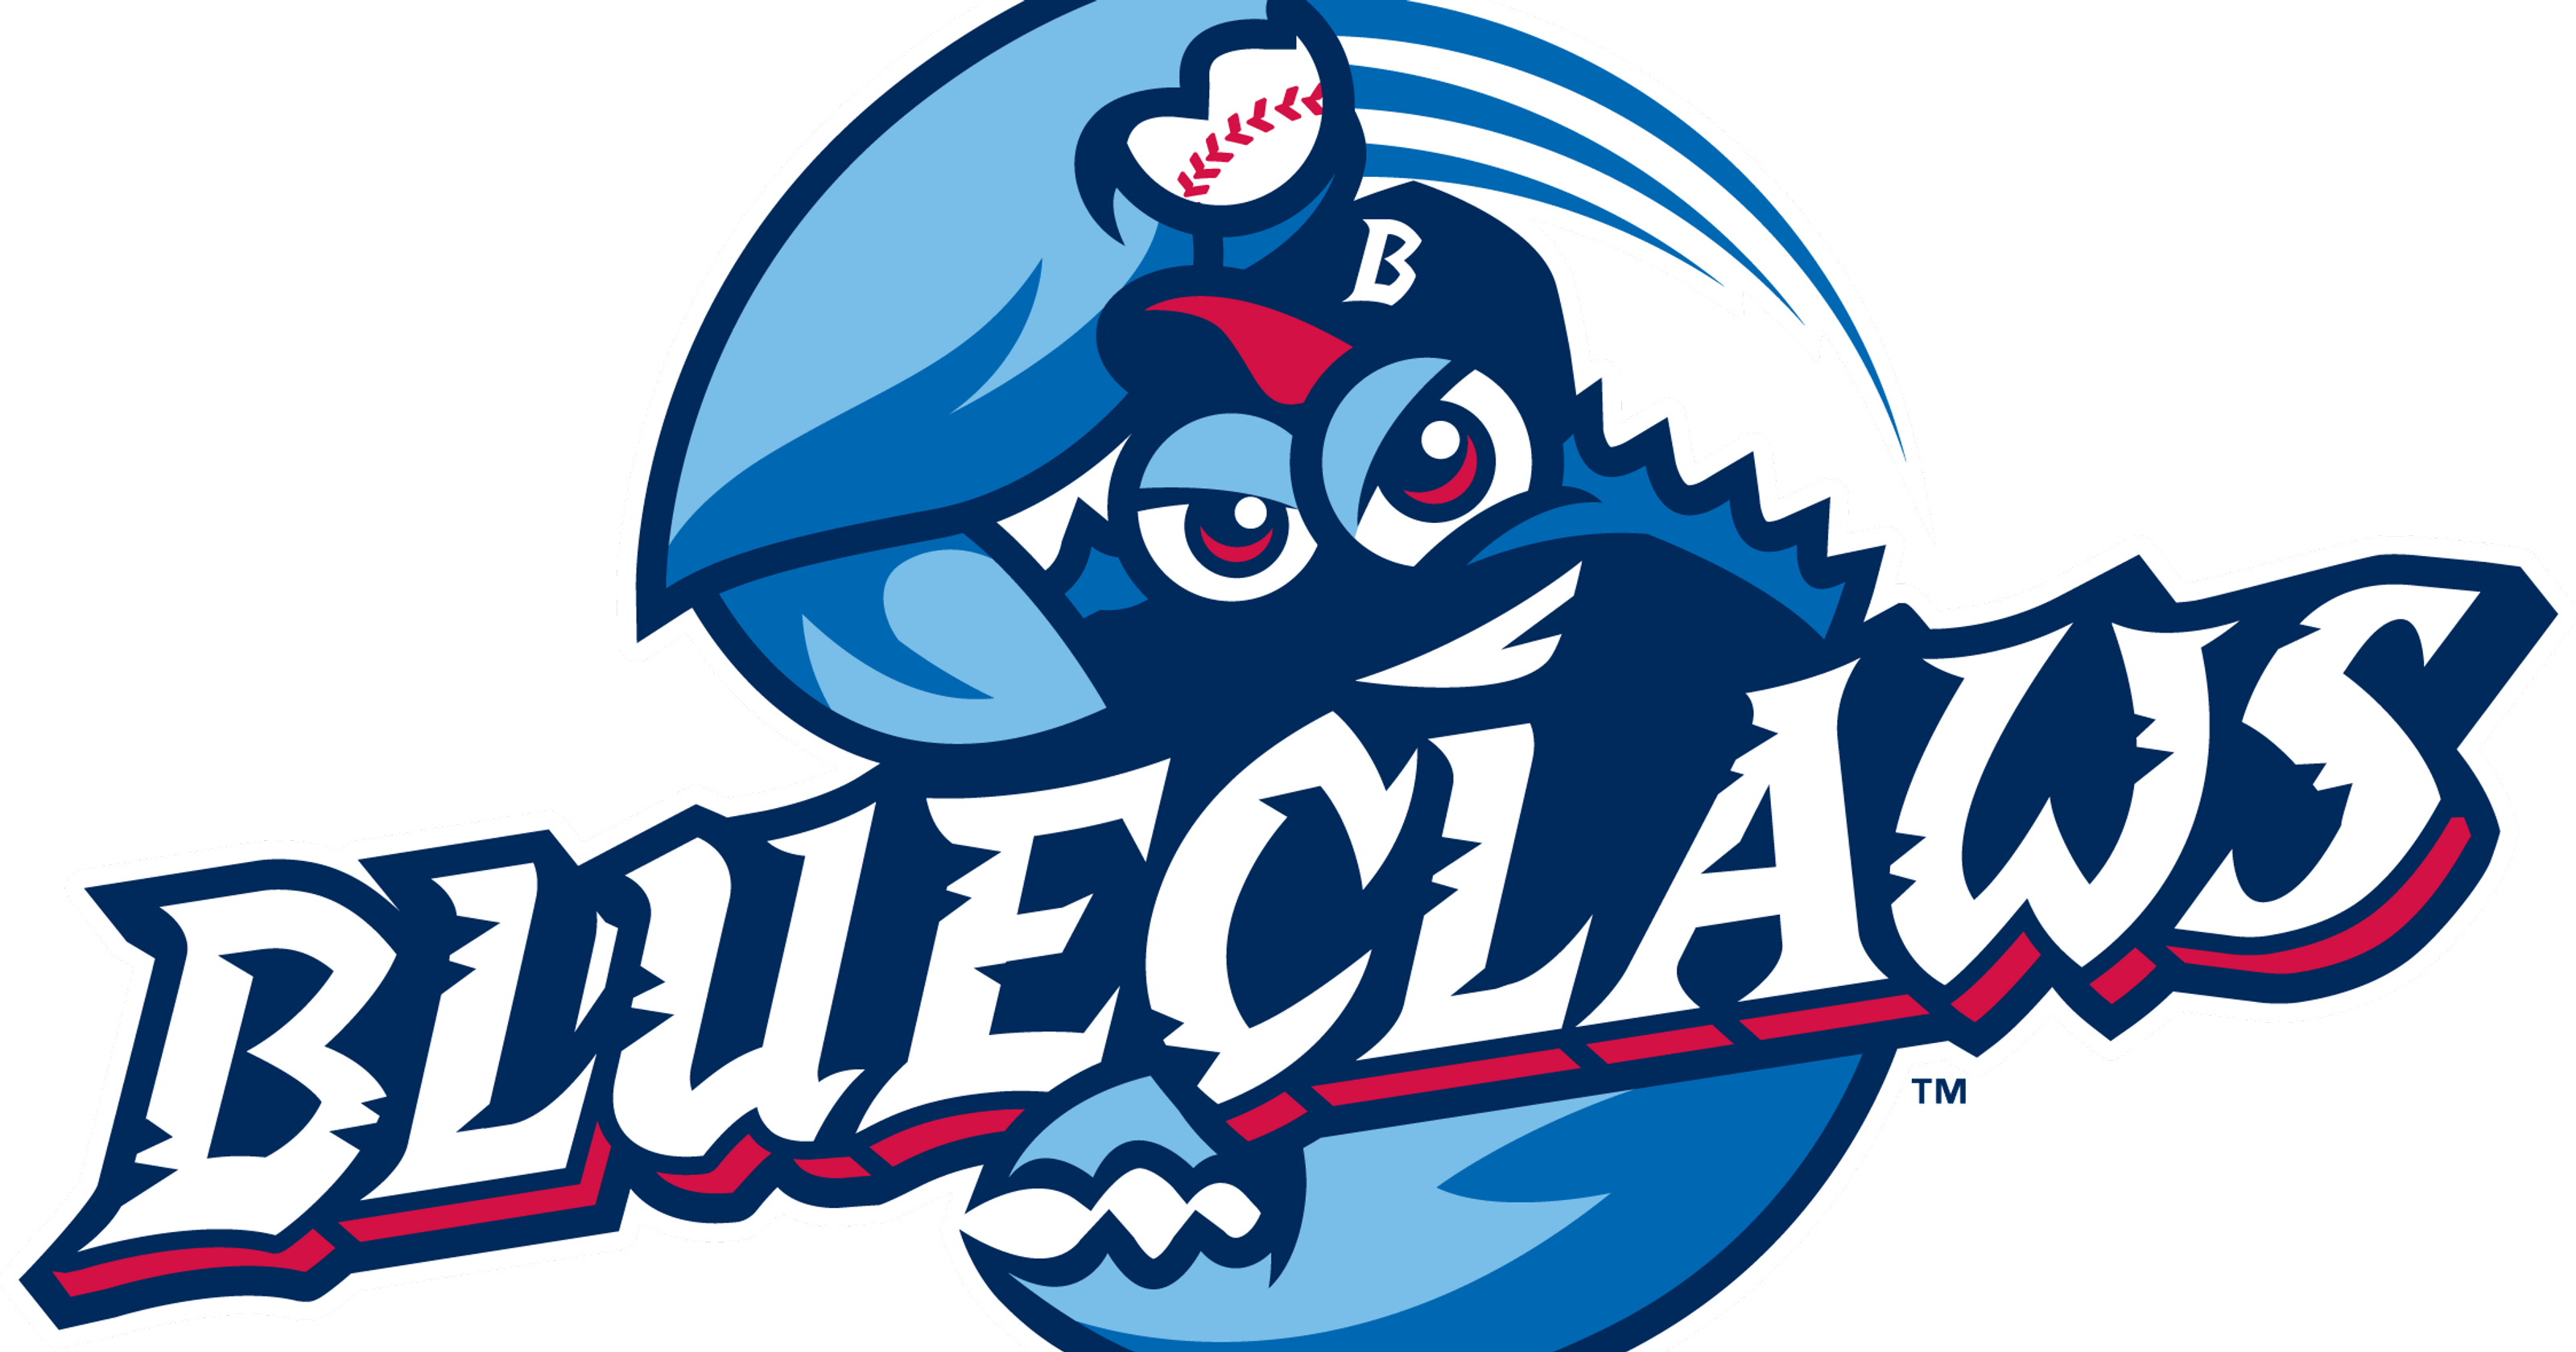 BlueClaws Logo - Mini golf, boardwalk games coming to Lakewood BlueClaws in 2018